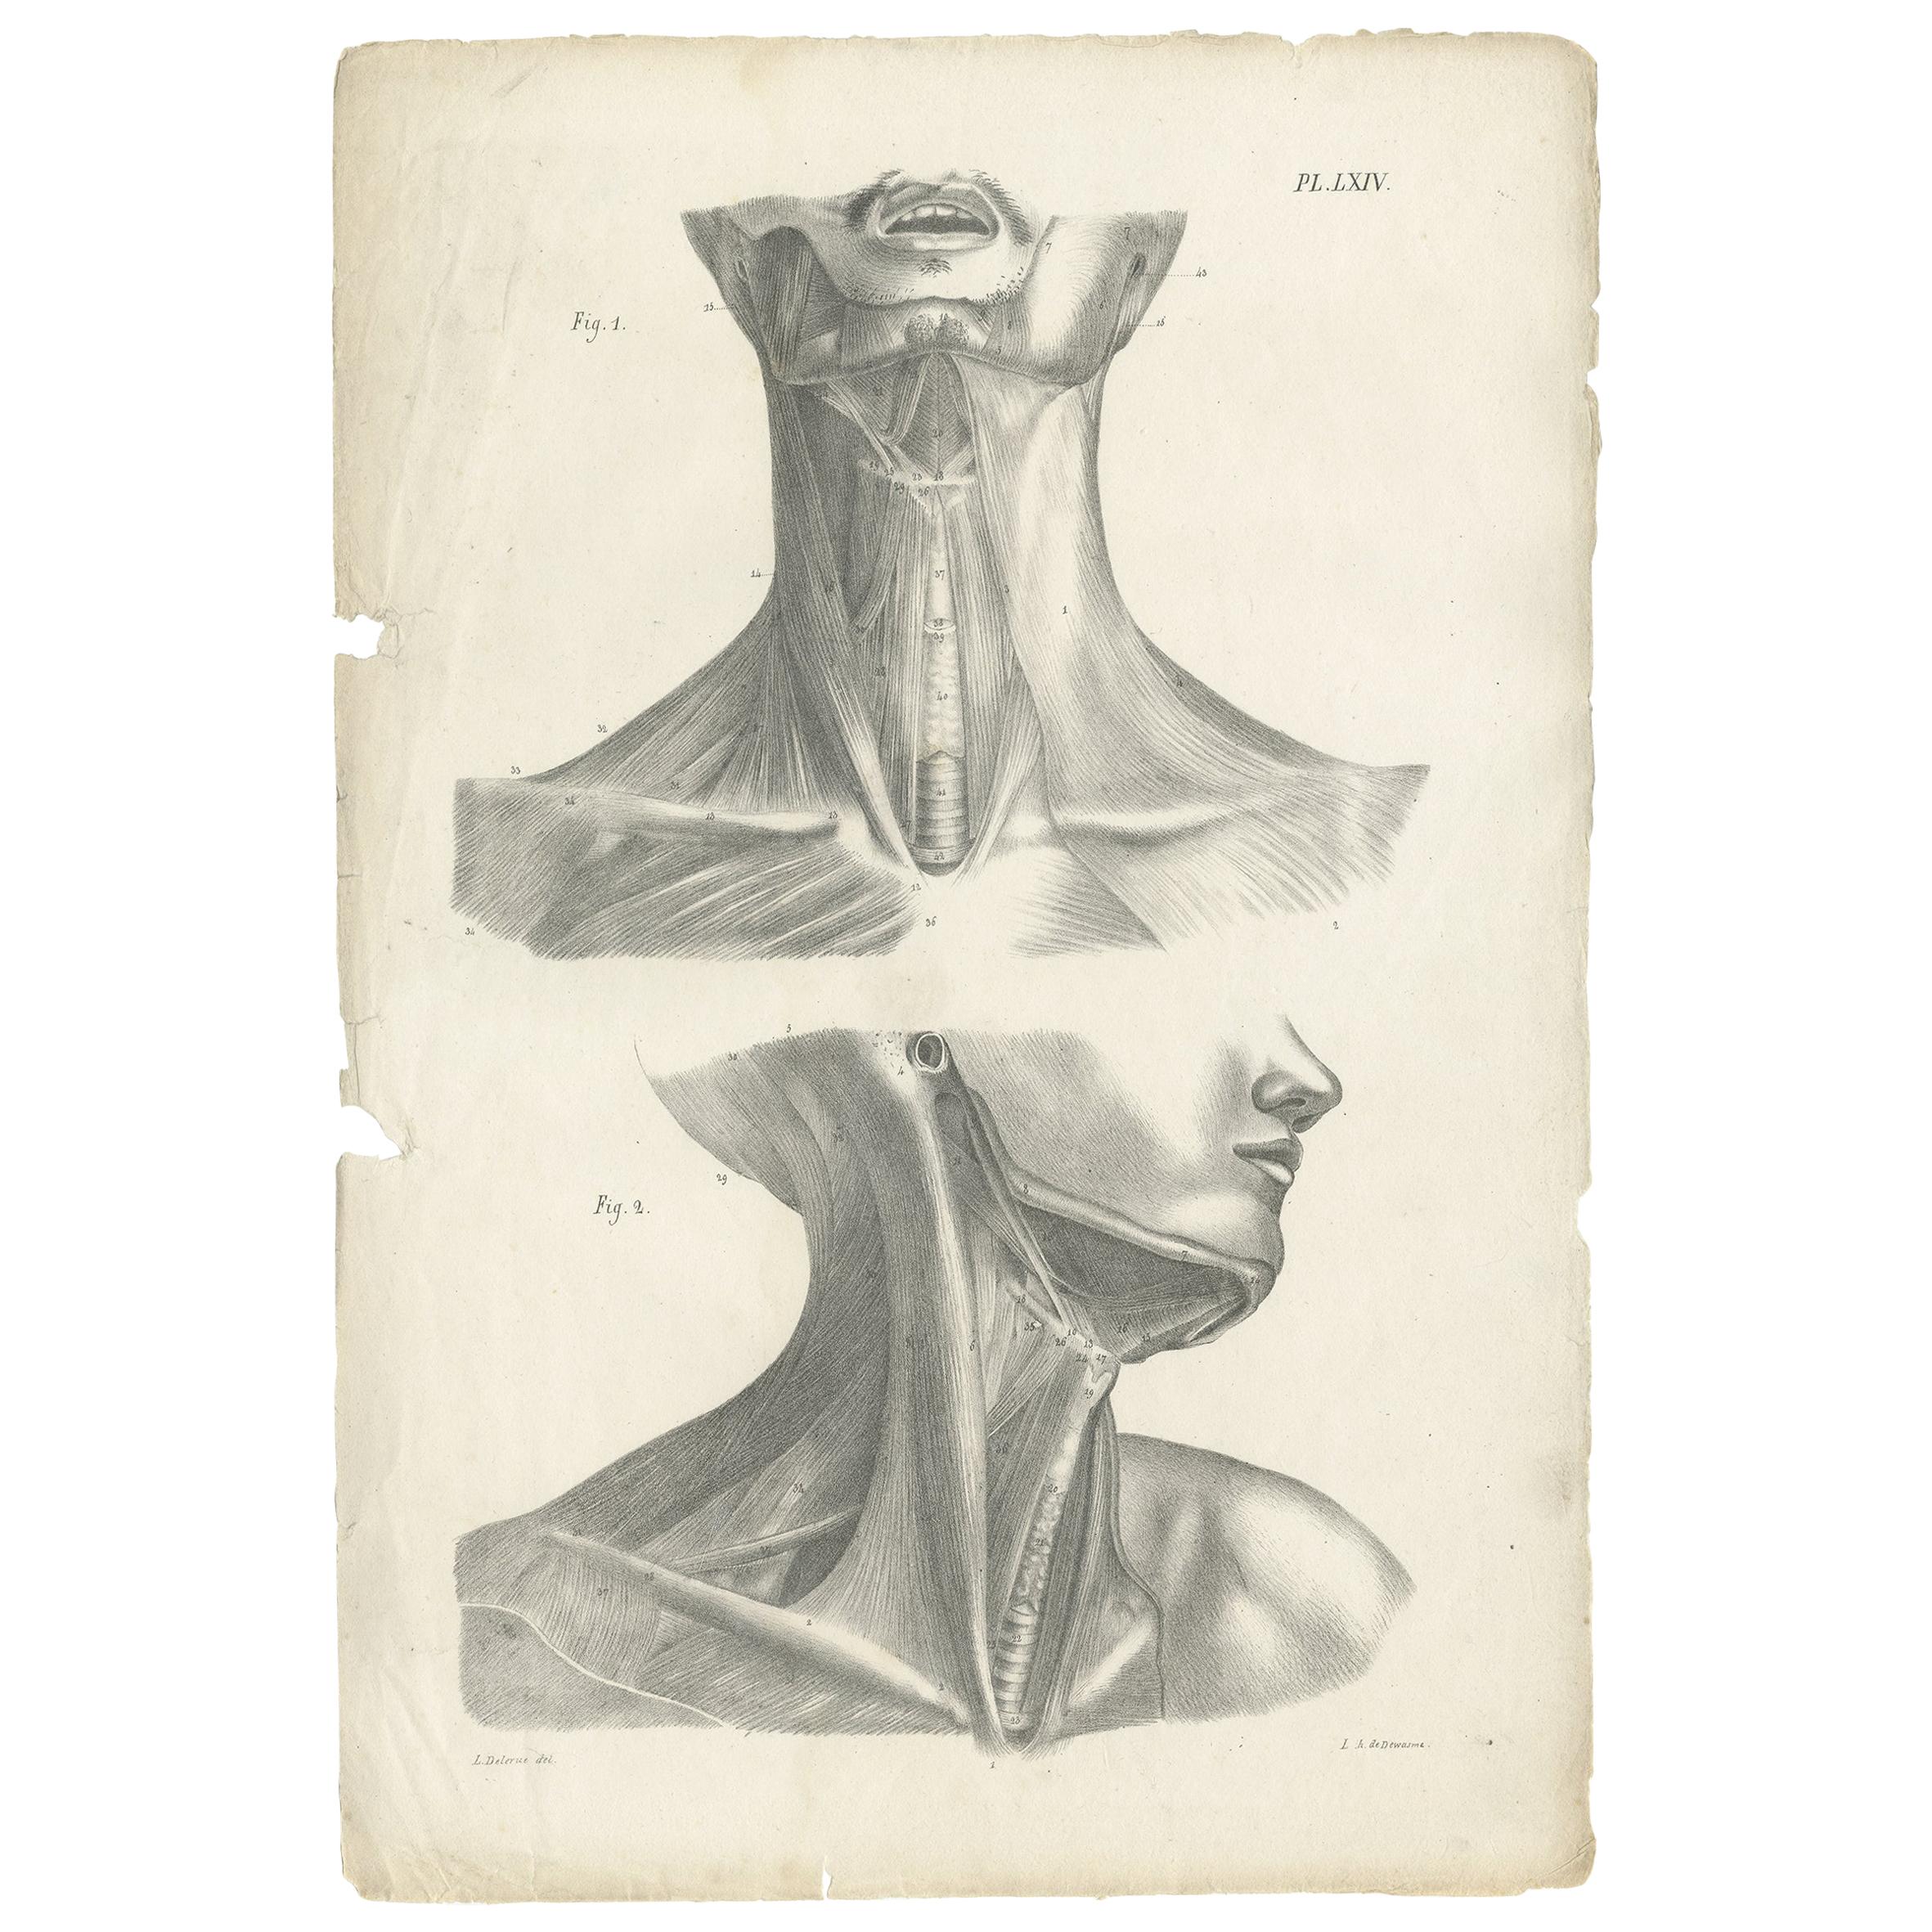 Pl. LXIV Antique Anatomy / Medical Print of the Neck muscles by Cloquet, '1821' For Sale